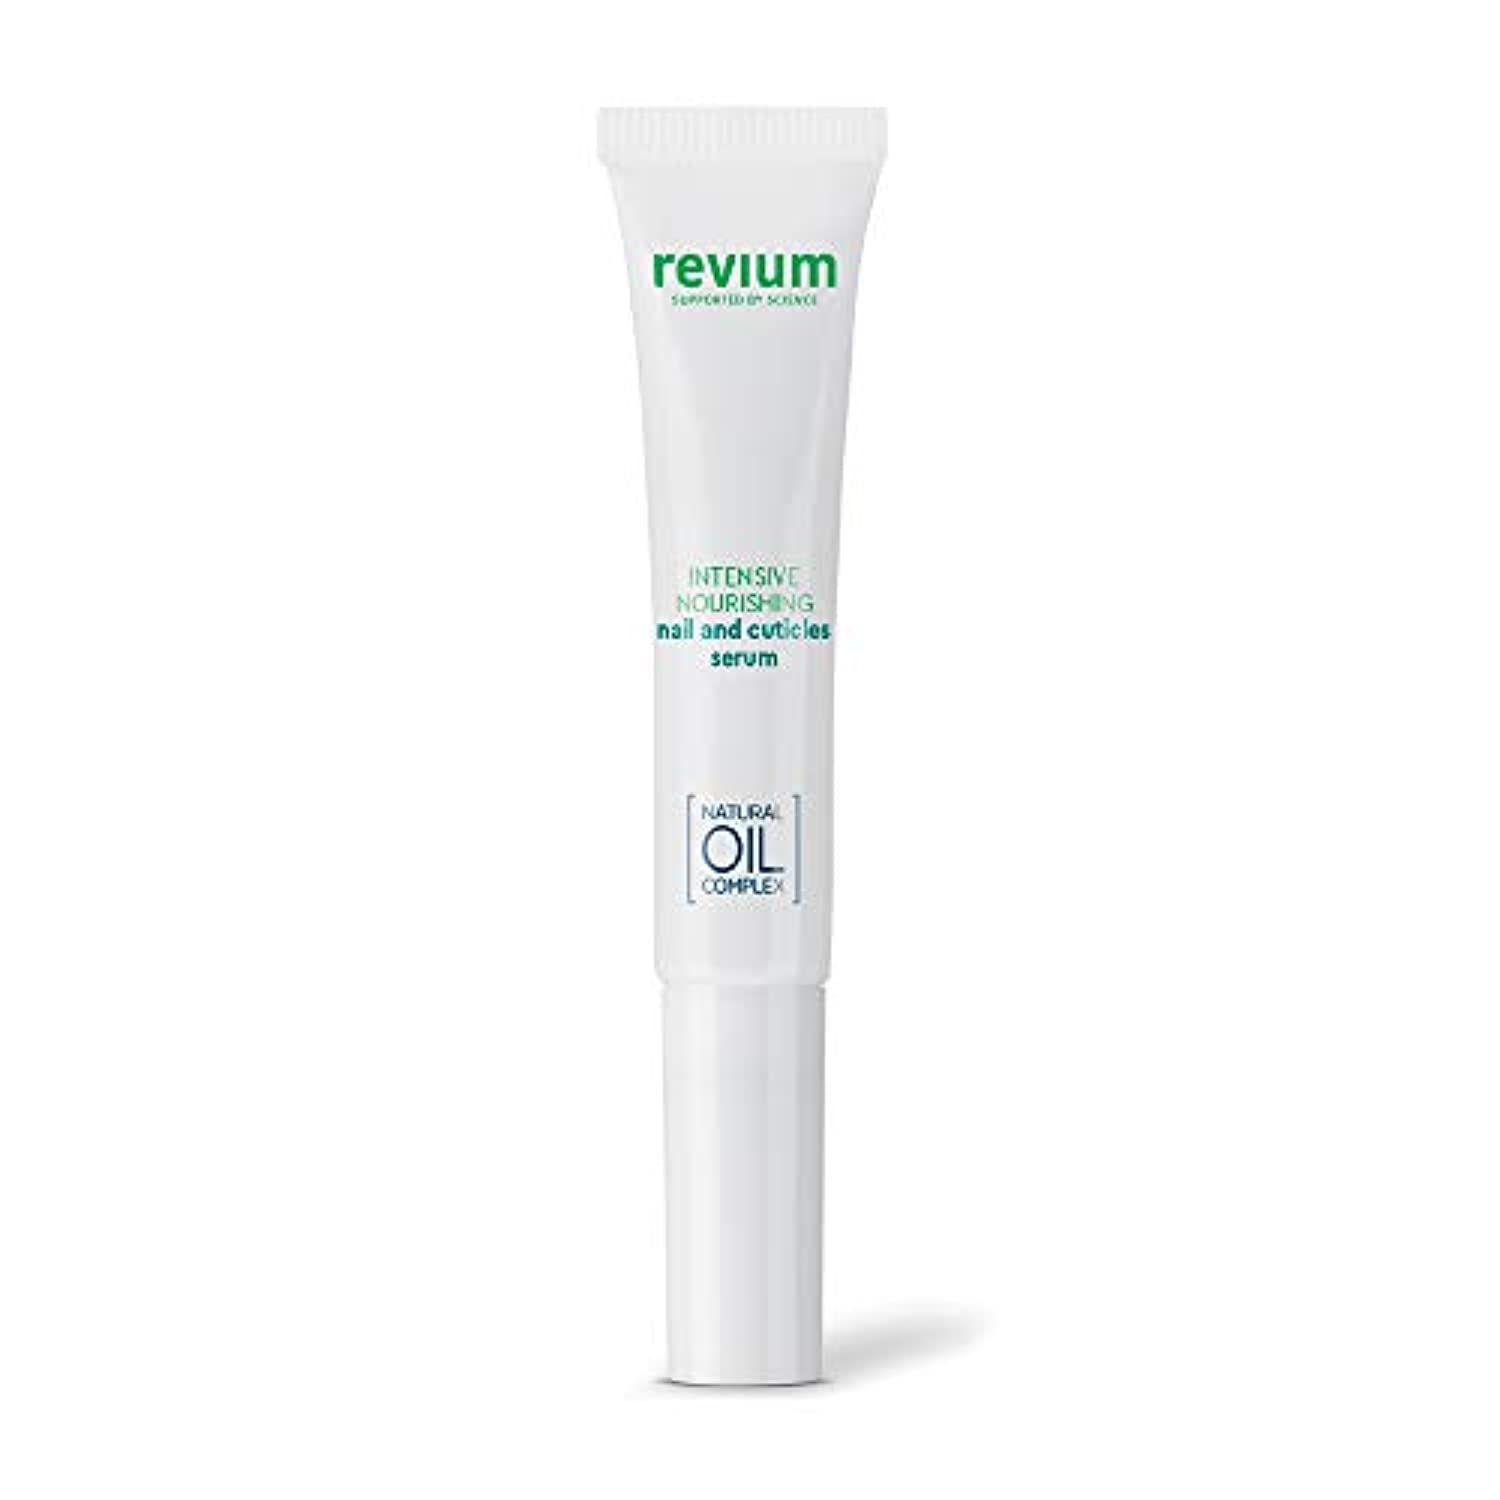 Revium Intensive Nourishing Nail And Cuticles Serum, Specialist Care Product With Myrrh, Cotton, Almond, Canola And Wheat Germ Oils, Eriched With Vitamins (A, E, F, and C), Lecithin, 7ml